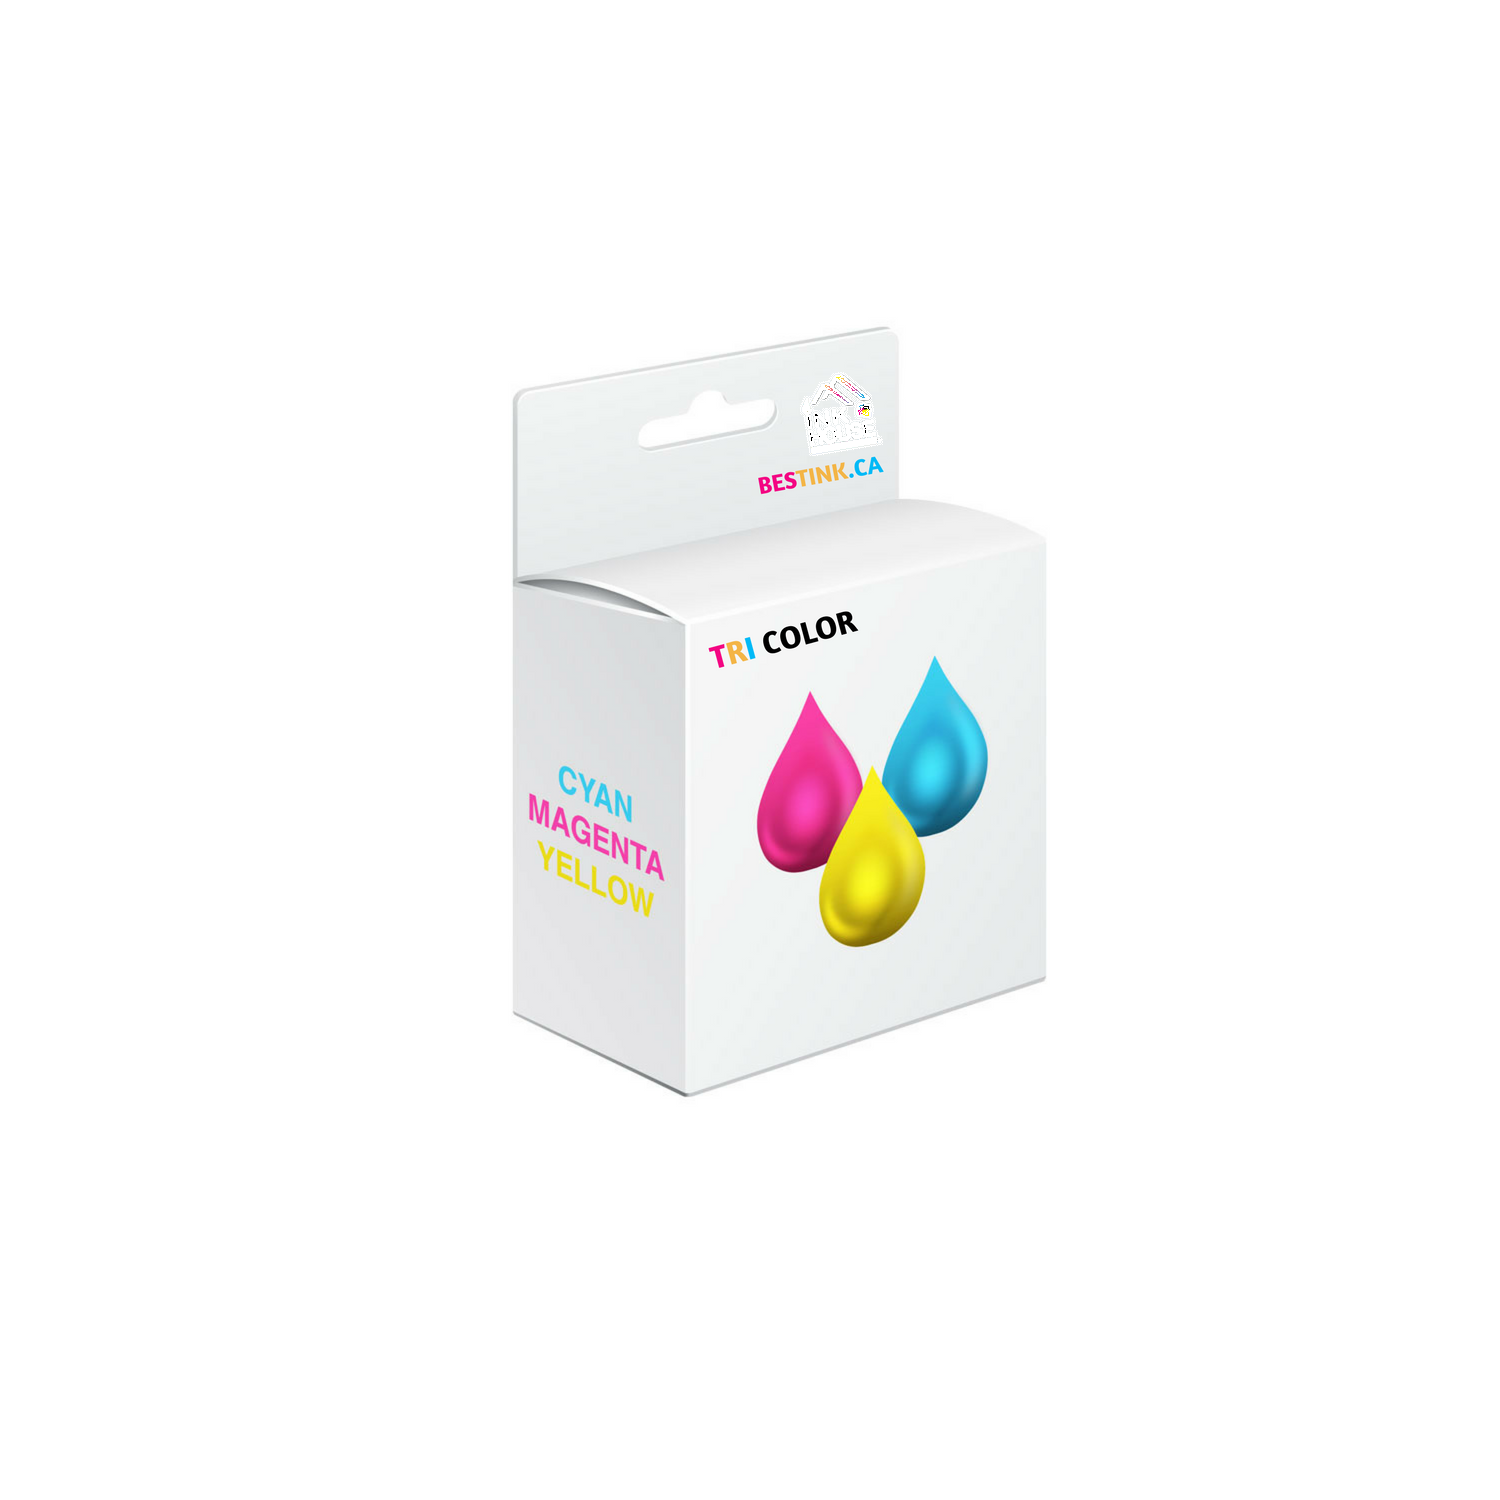 HP 61XL Color Remanufactured Ink Cartridge (High Capacity of HP 61) -Free Shipping Over $50